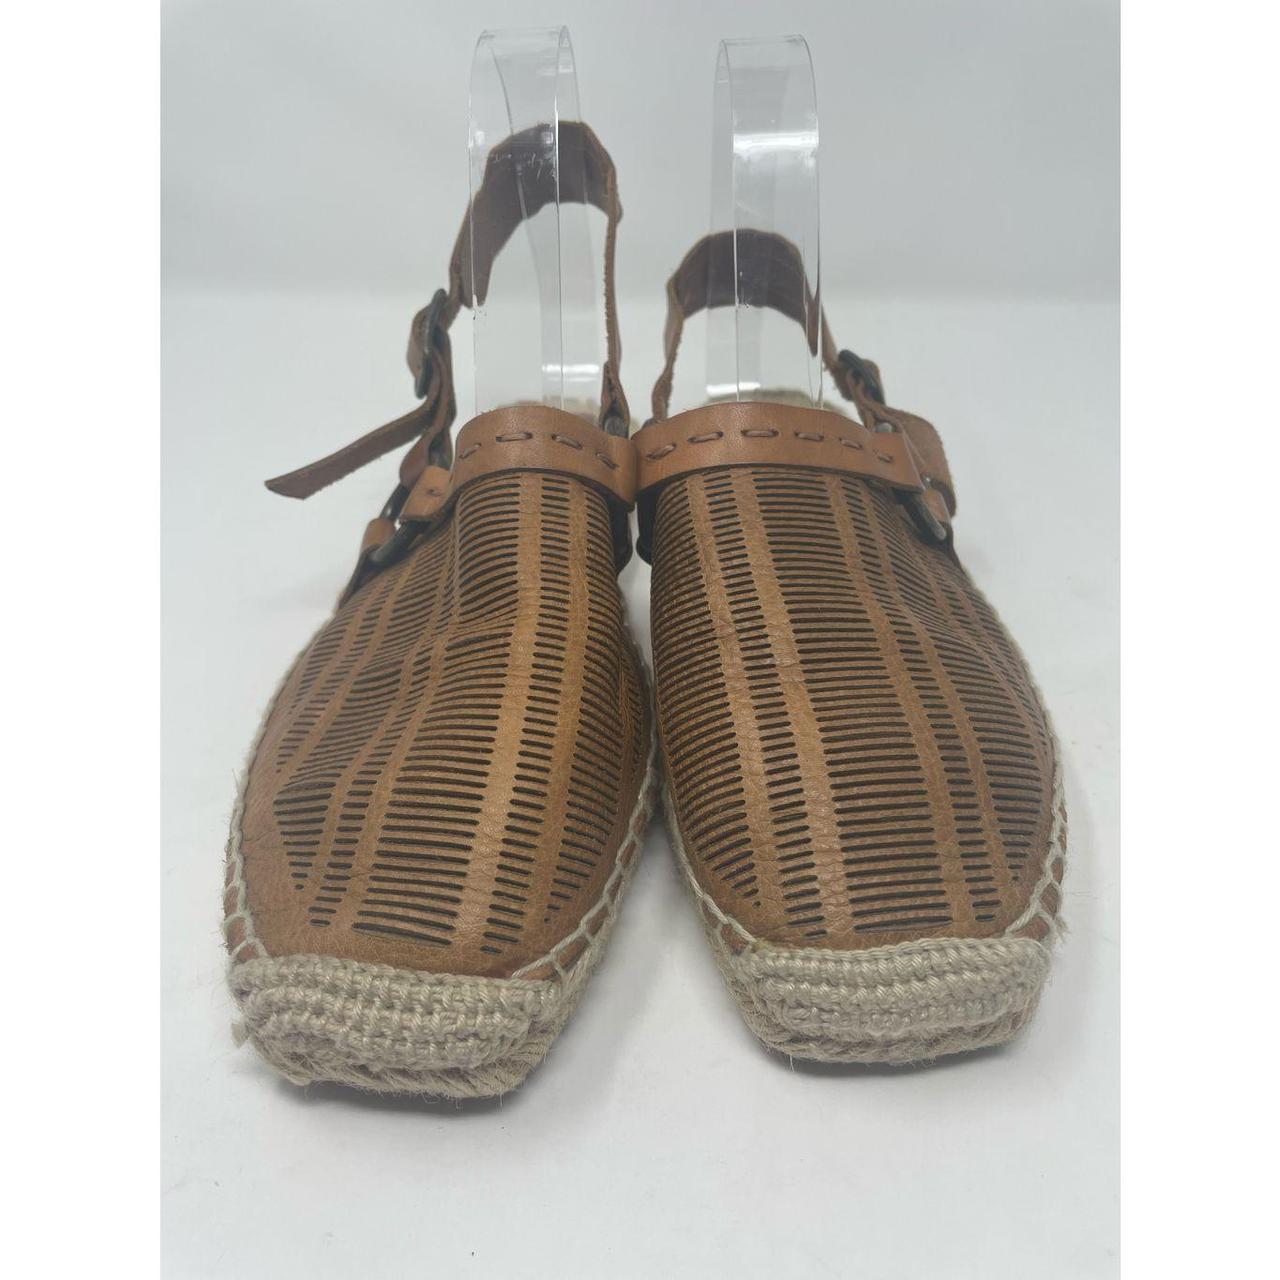 Product Image 3 - Effortless slip-on espadrilles featuring a